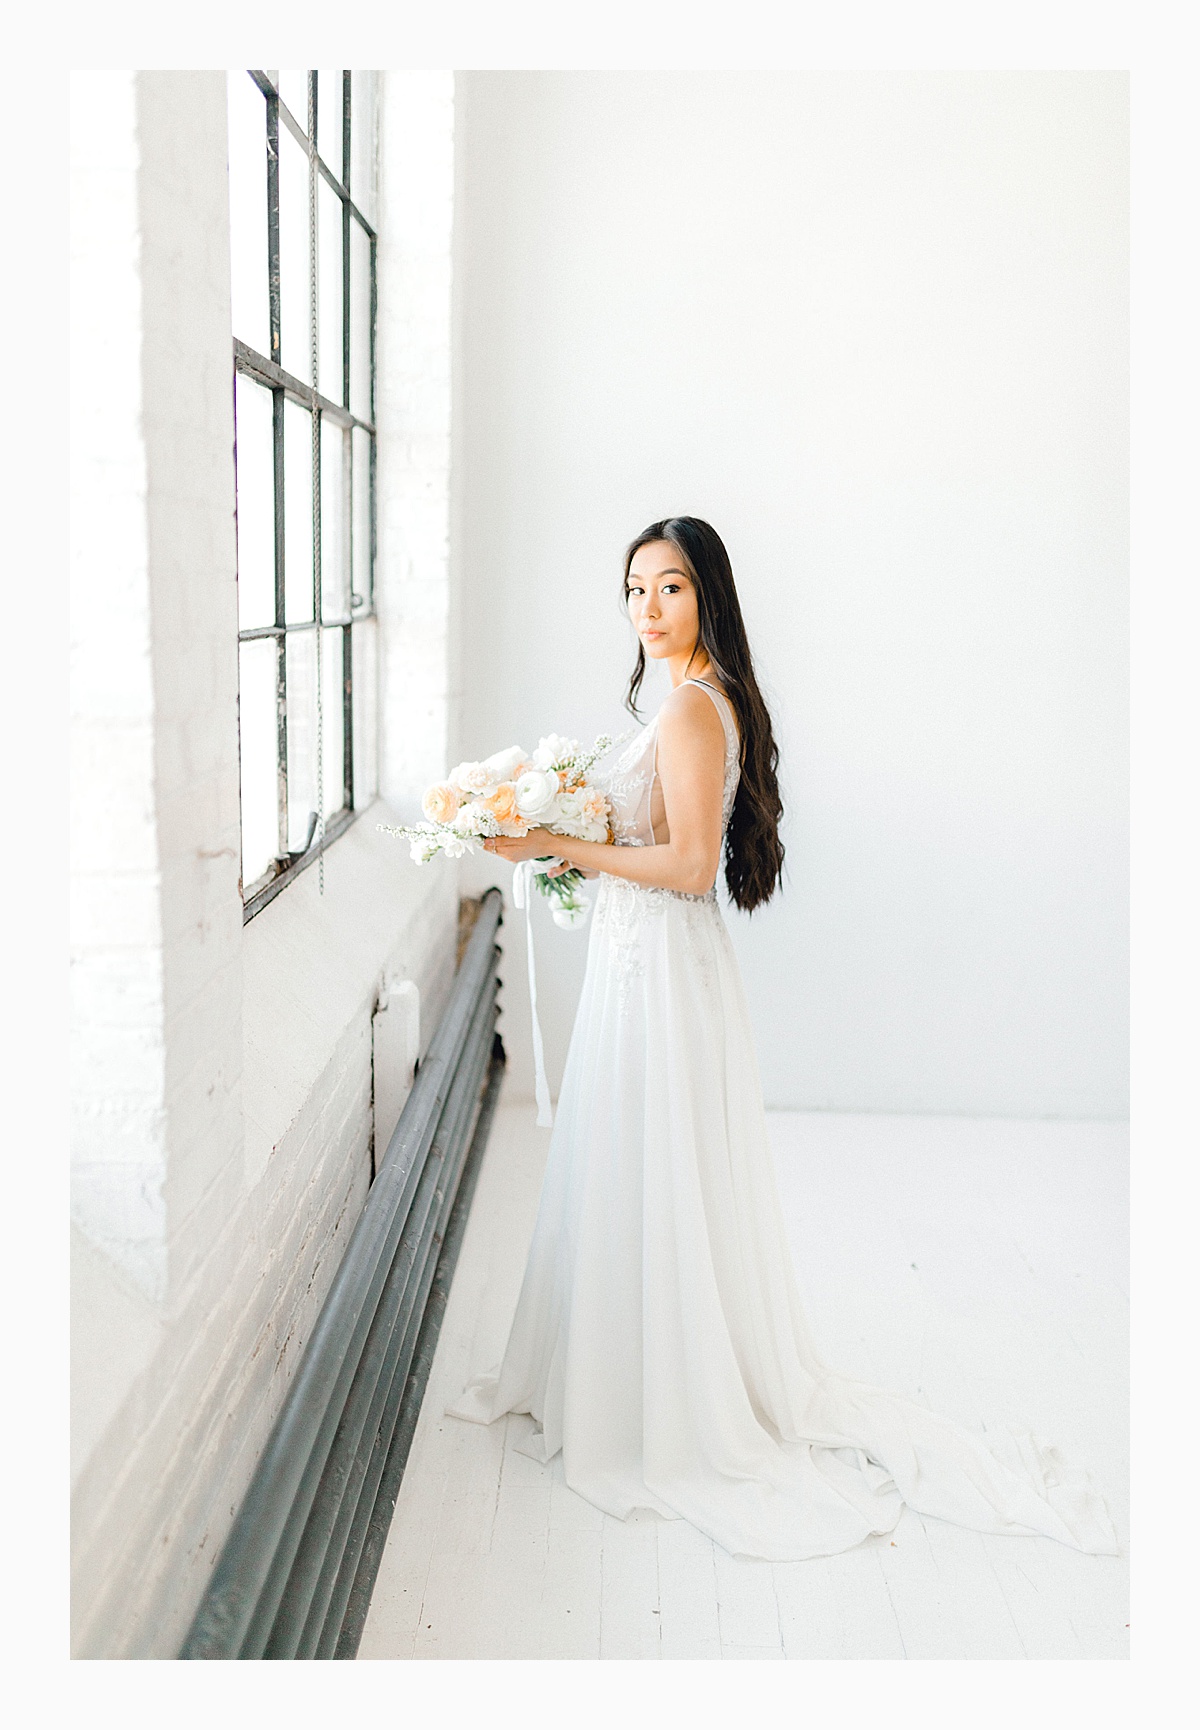 The Bemis Building in downtown Seattle is one of my favorite places to use for photo shoots!  This styled bridal shoot with touches of peach and white was dreamy.  #emmarosecompany #kindredpresets #seattlebride_0025.jpg